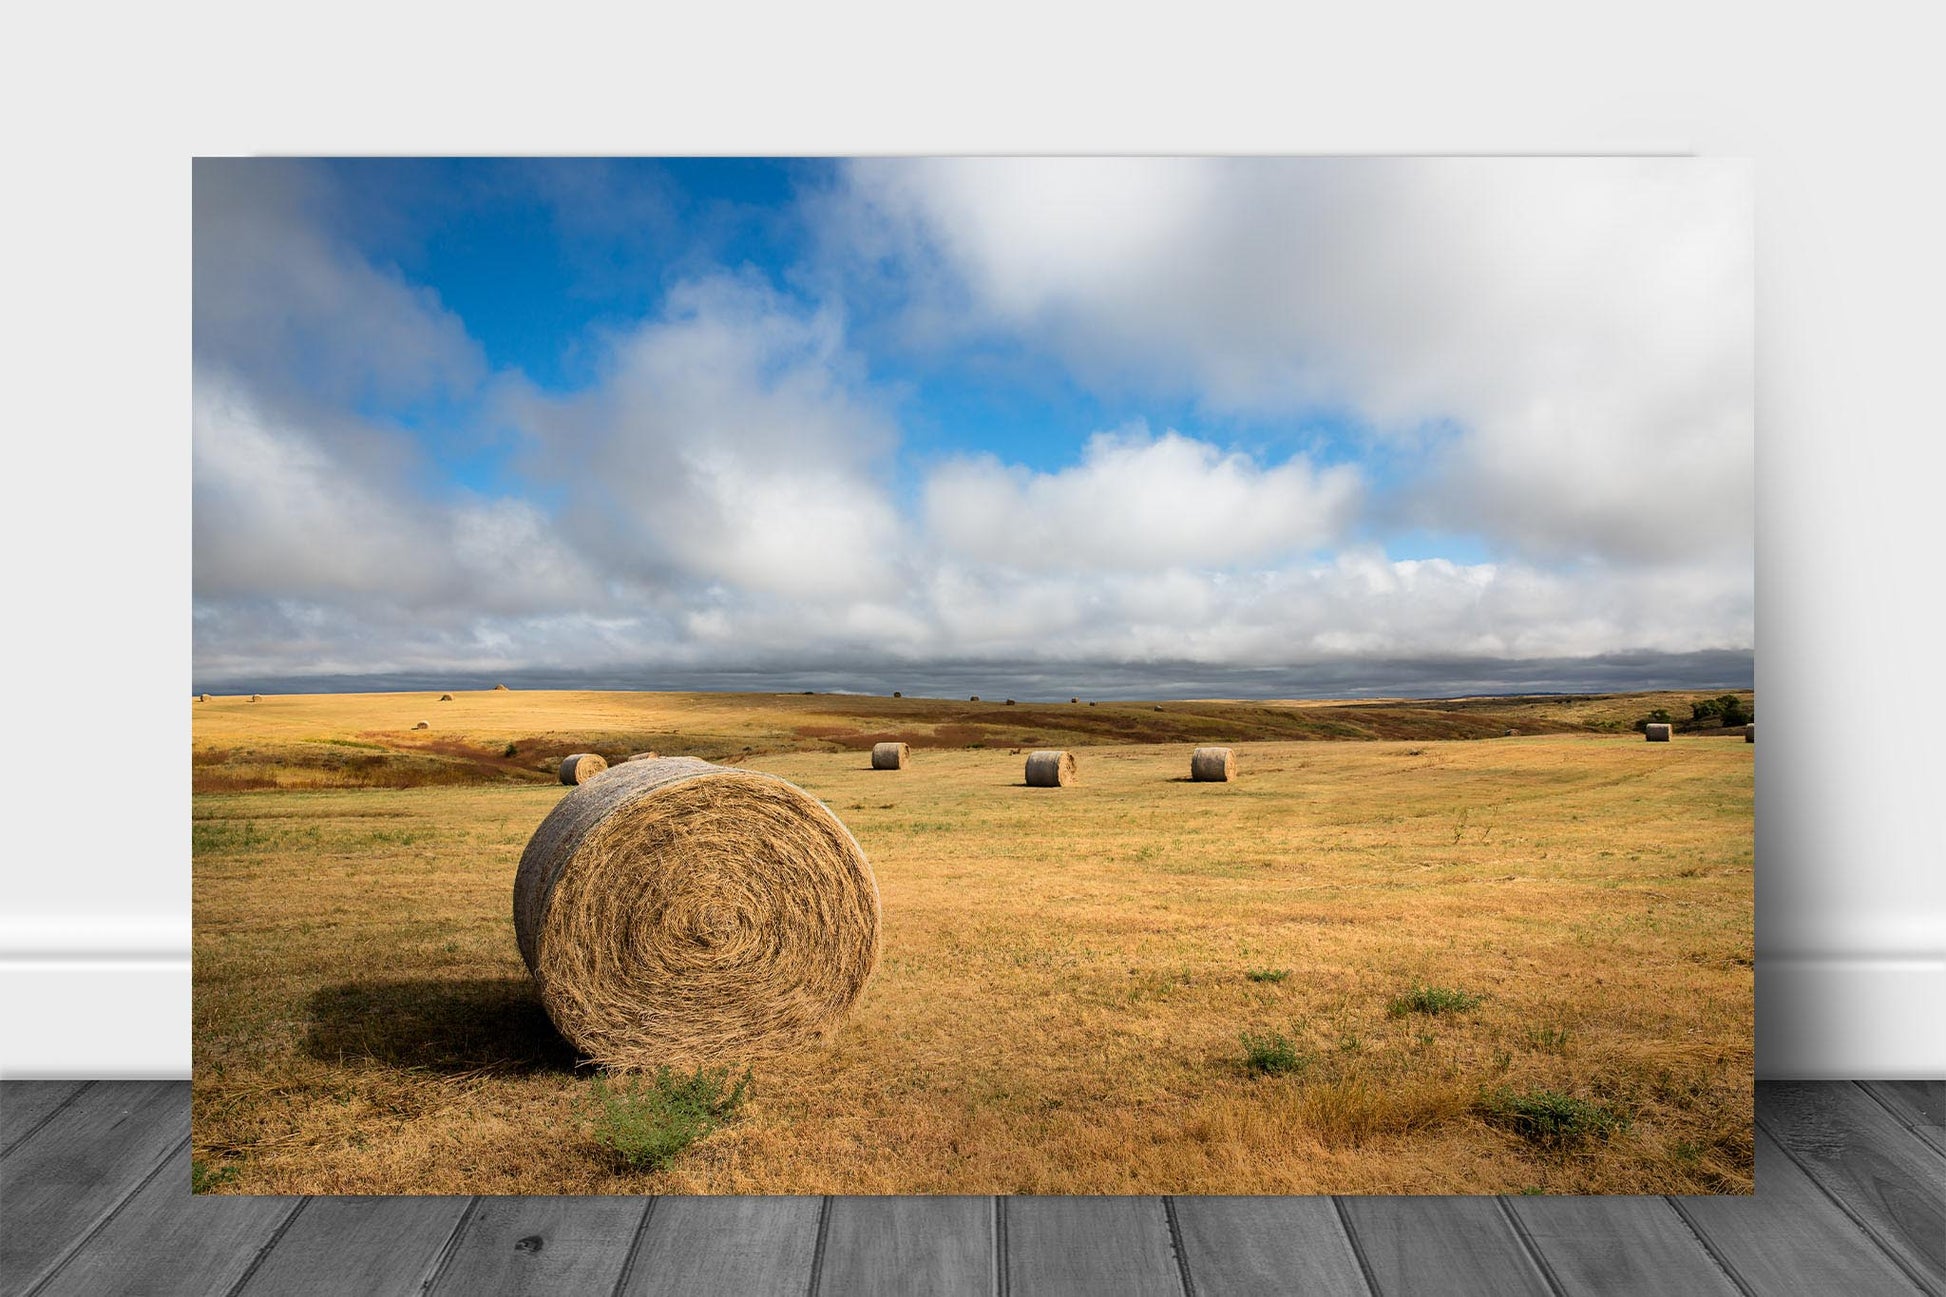 Northern Plains metal print on aluminum of round hay bales scattered across the prairie on an autumn day on the Pine Ridge Reservation in South Dakota by Sean Ramsey of Southern Plains Photography.